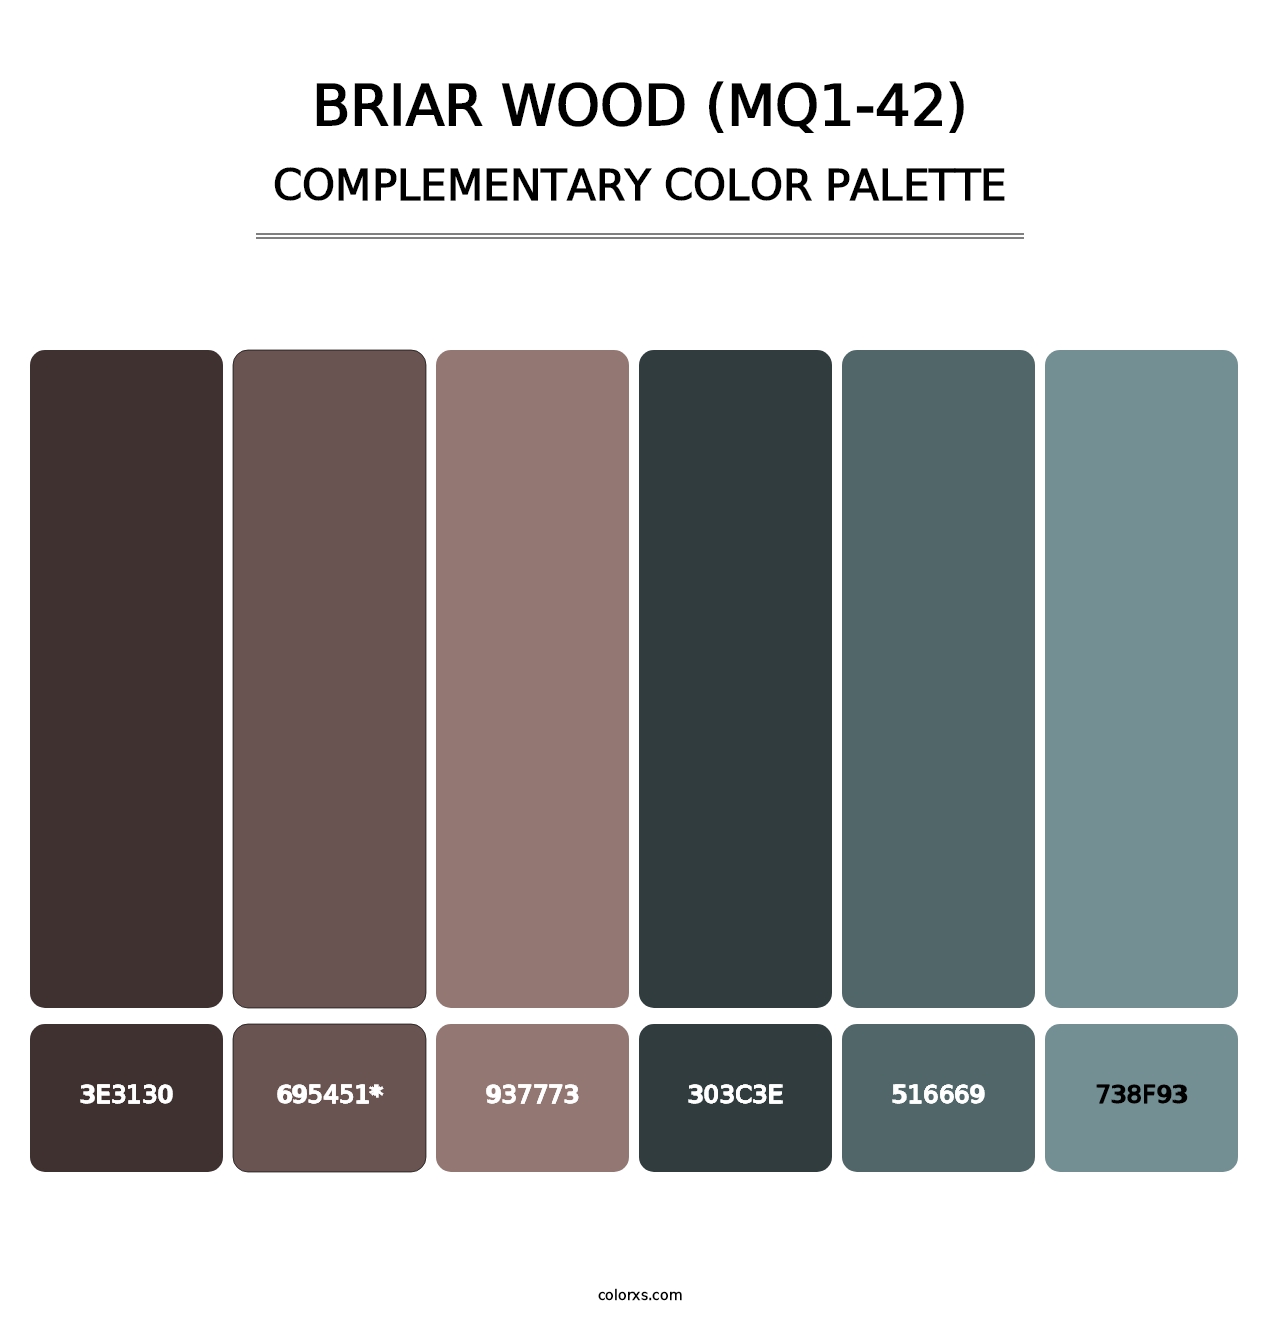 Briar Wood (MQ1-42) - Complementary Color Palette